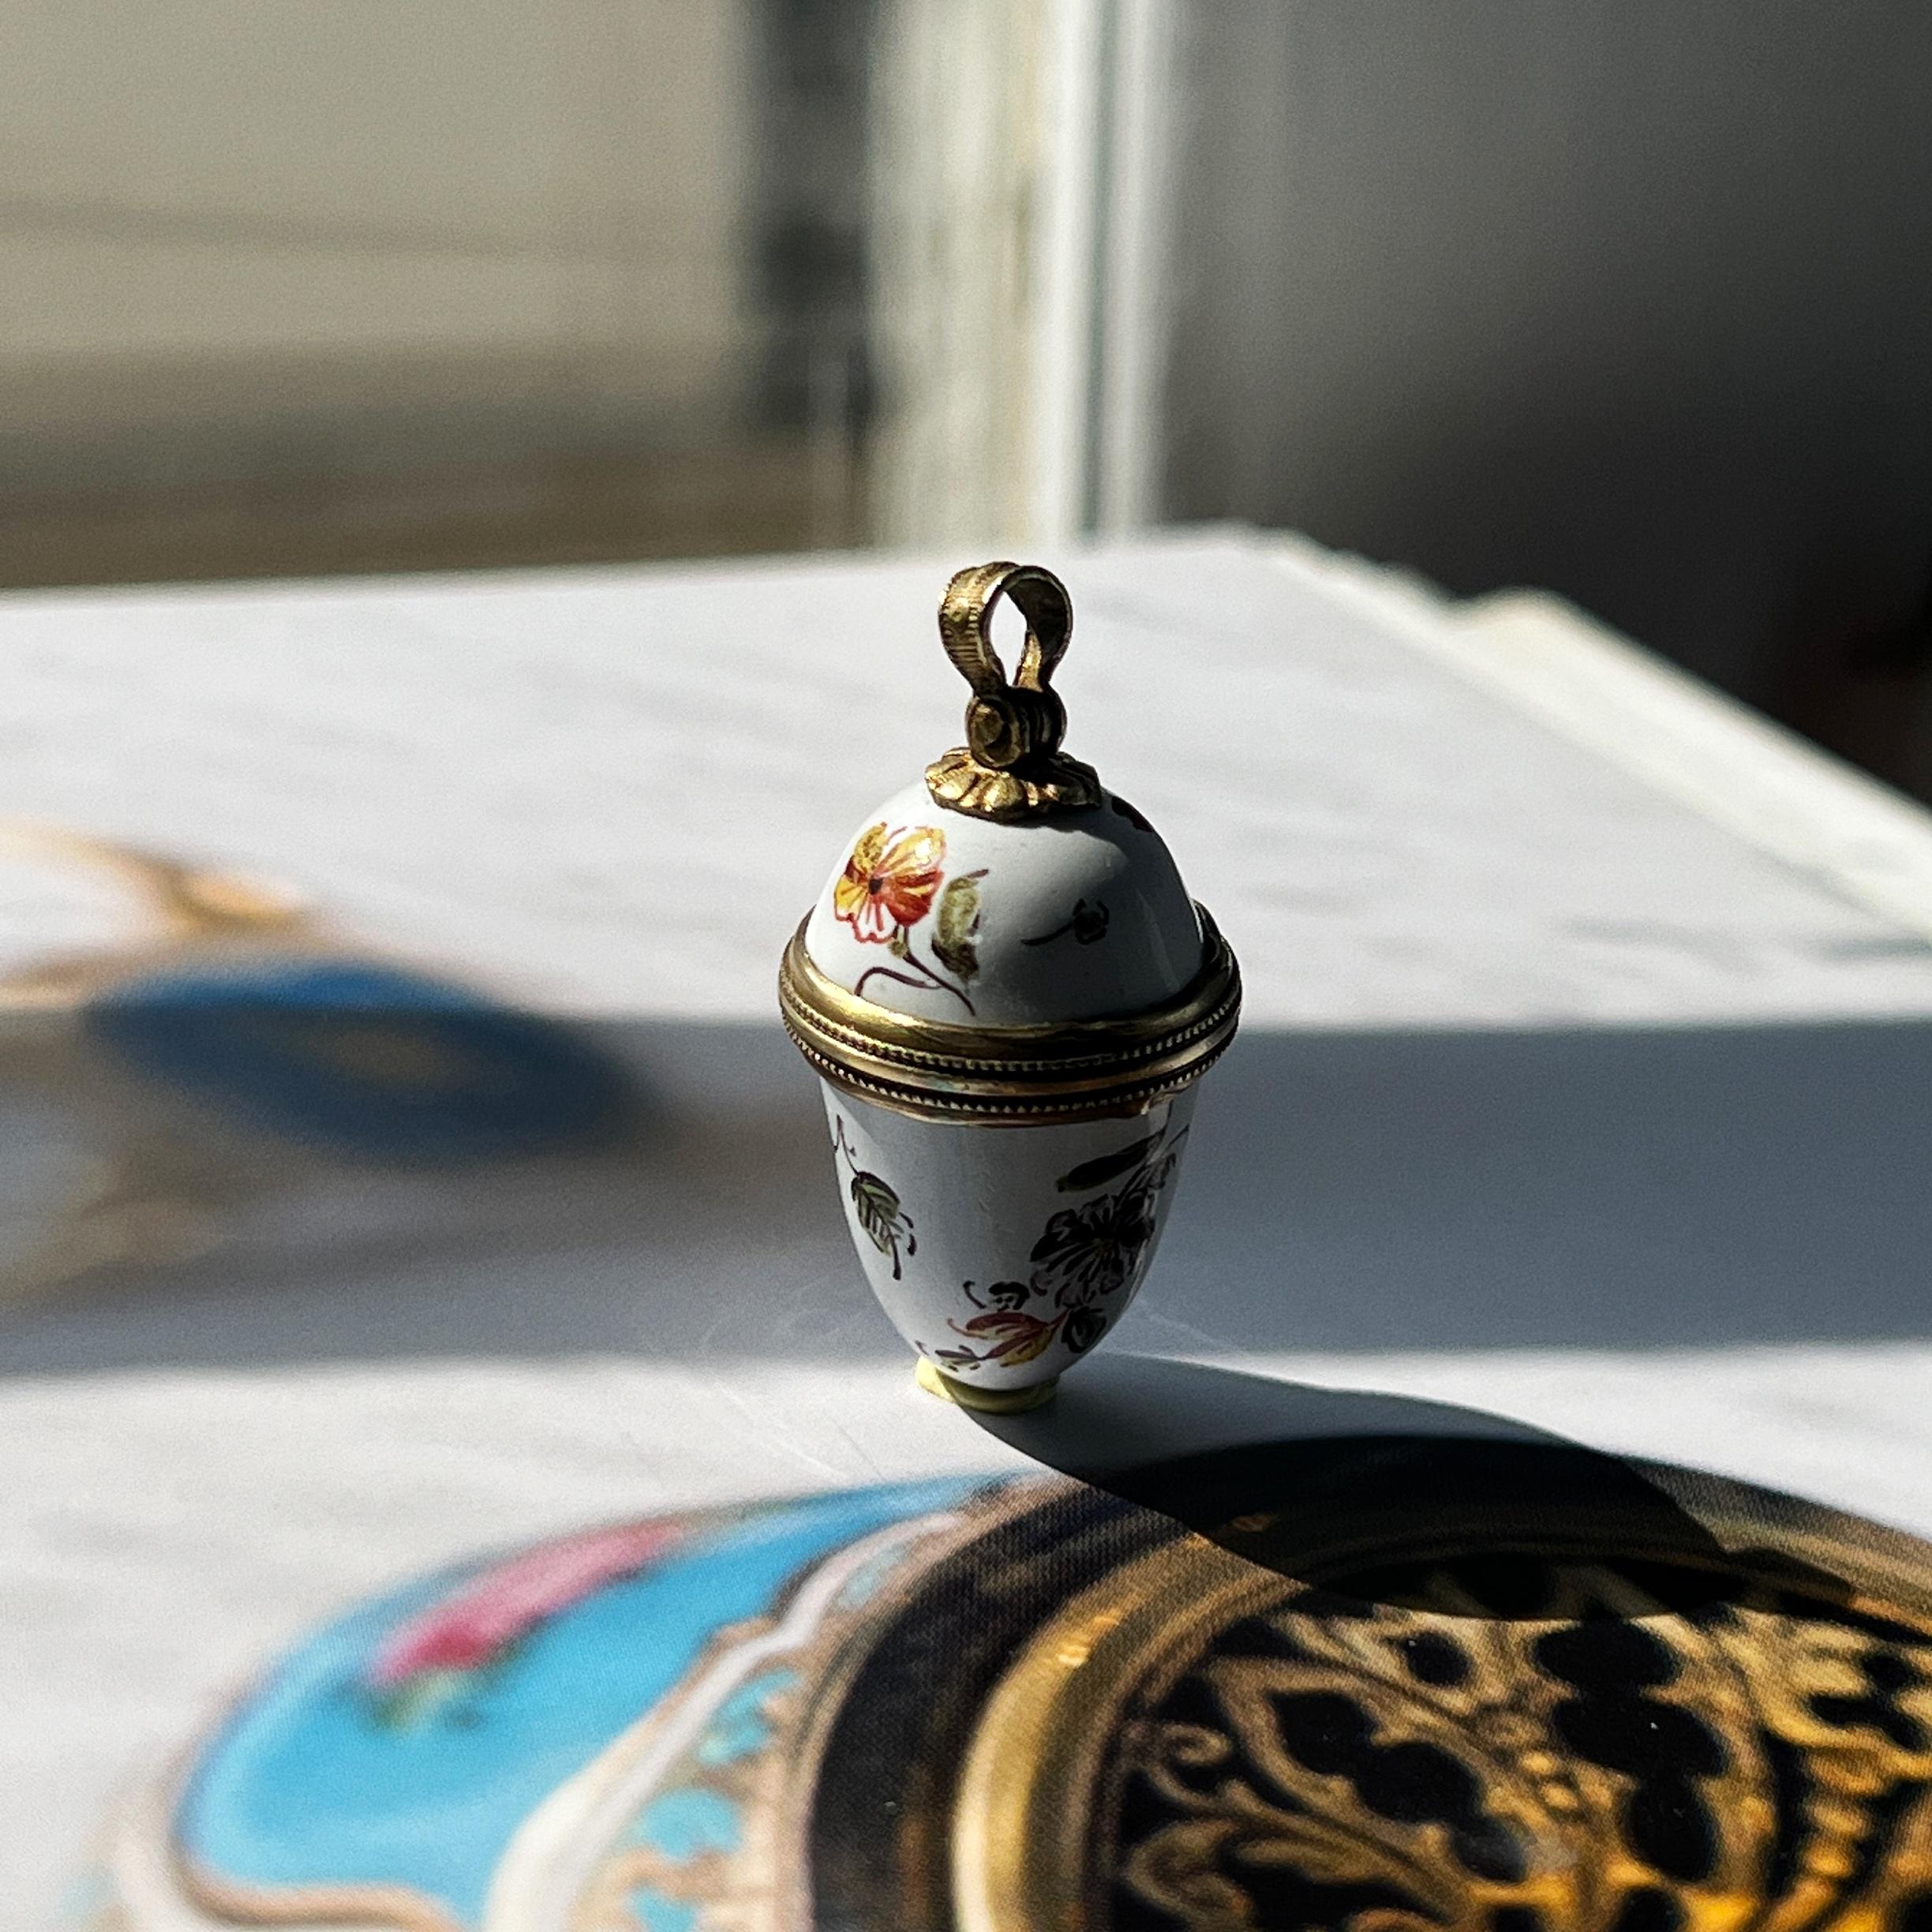 For sale a very rare French antique salt bottle dated back to the early 19th century, circa 1830s. The little bottle still opens and closes well allowing you to safely preserve and cherish something dear to your heart today.

We adore the lovely